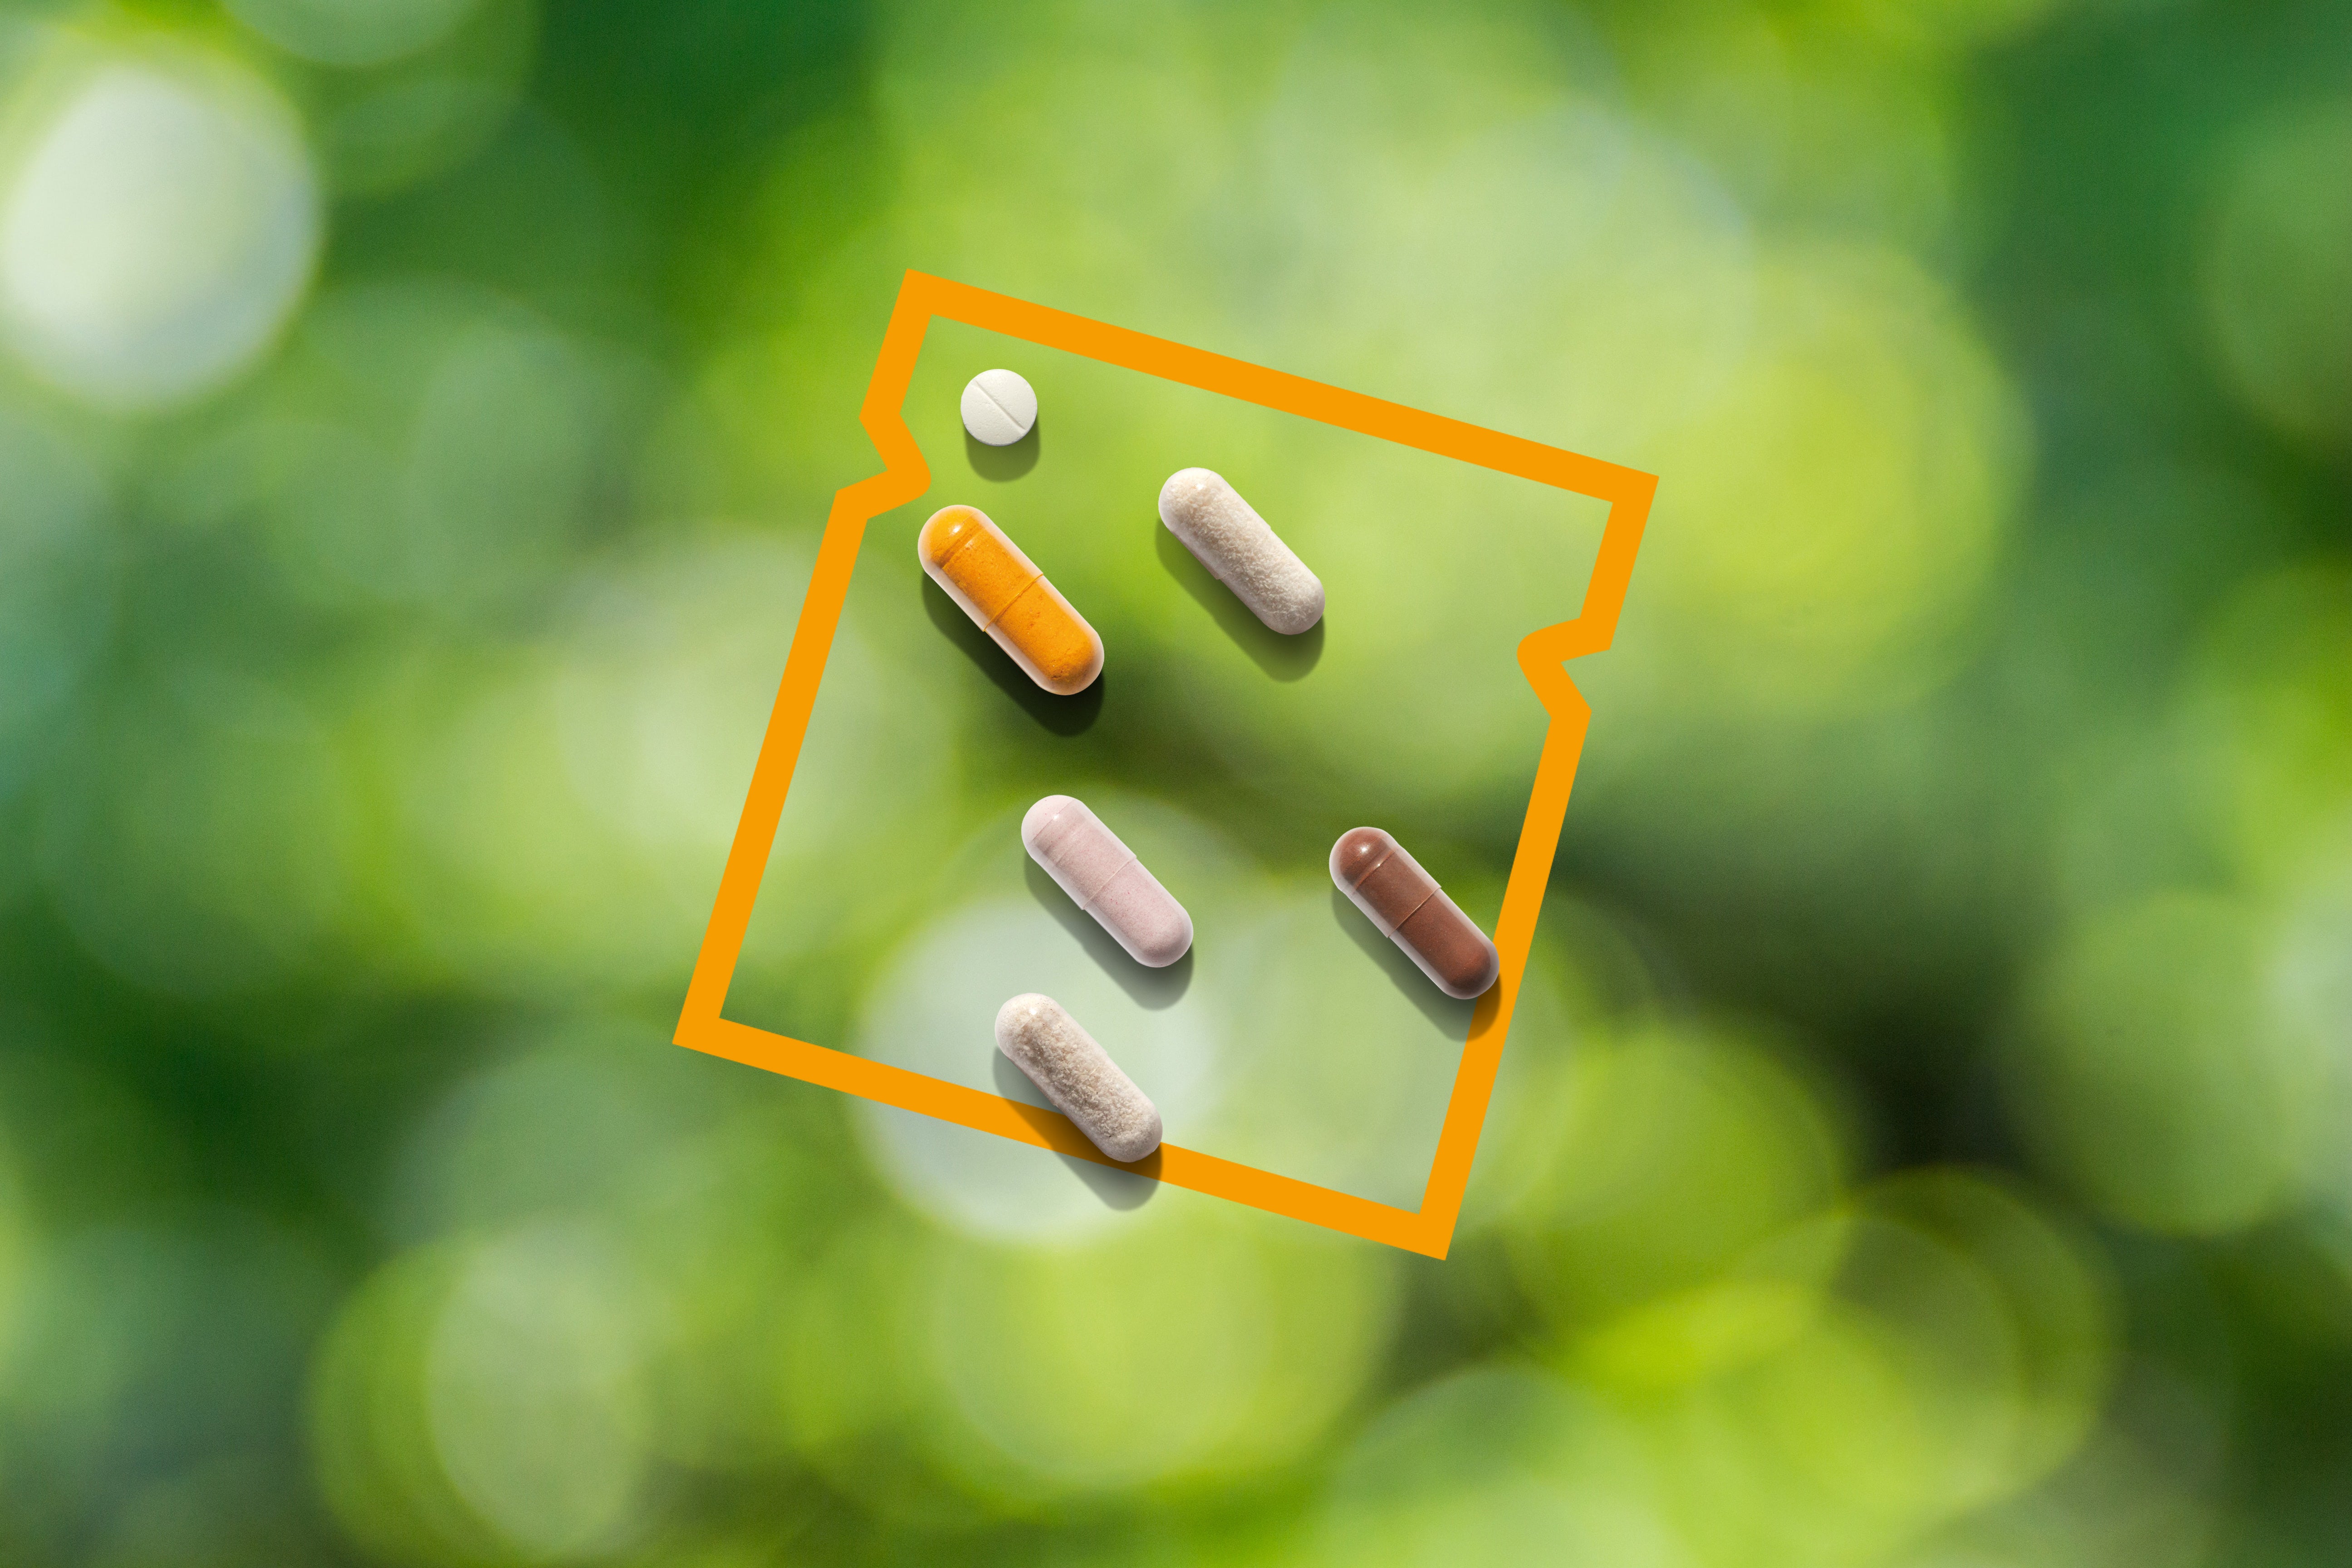 Generated picture of six different dunatura capsules with an orange vector graphic in the foreground and blurry green tree leaves in the background